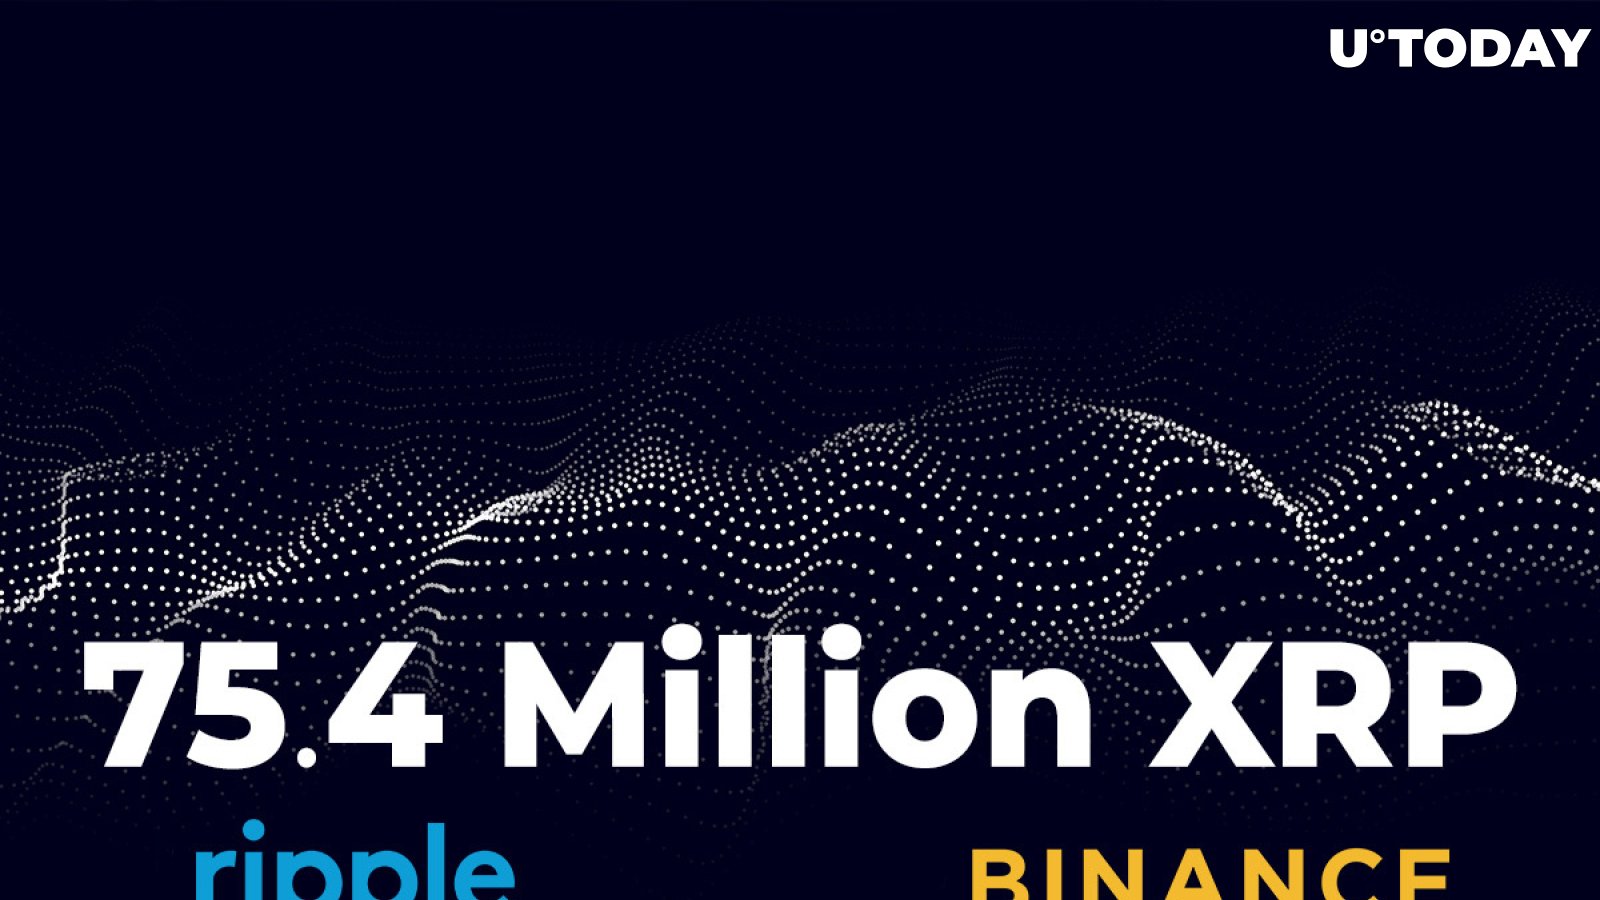 75.4 Million XRP Moved by Ripple and Binance, With Ripple's Regular Tranche to Huobi